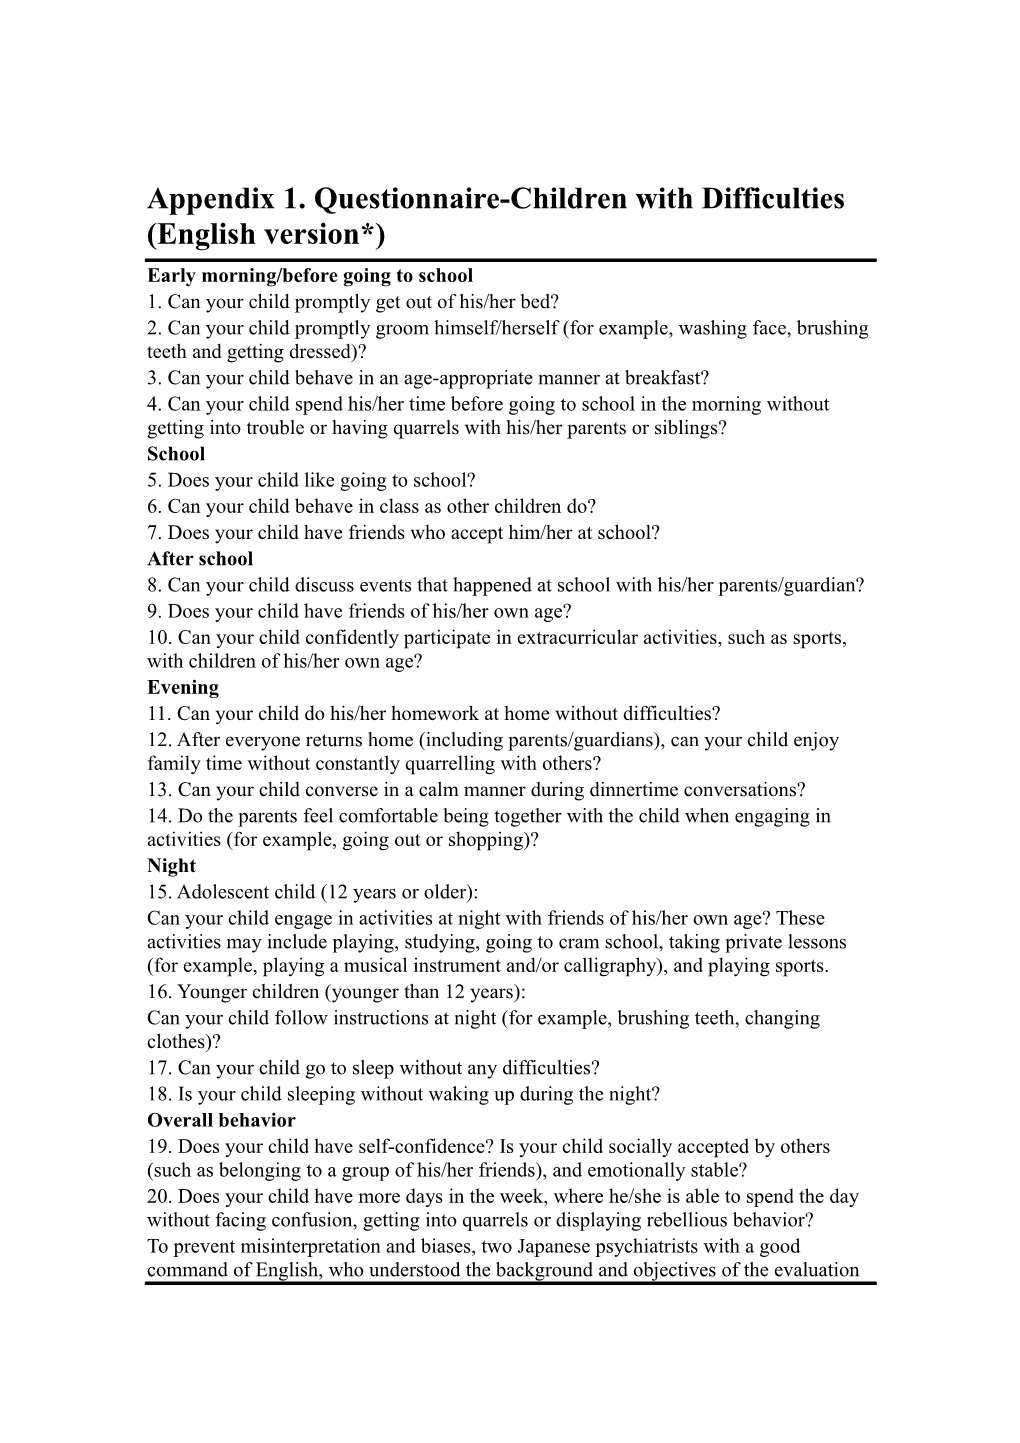 Appendix 1. Questionnaire-Children with Difficulties (English Version*)